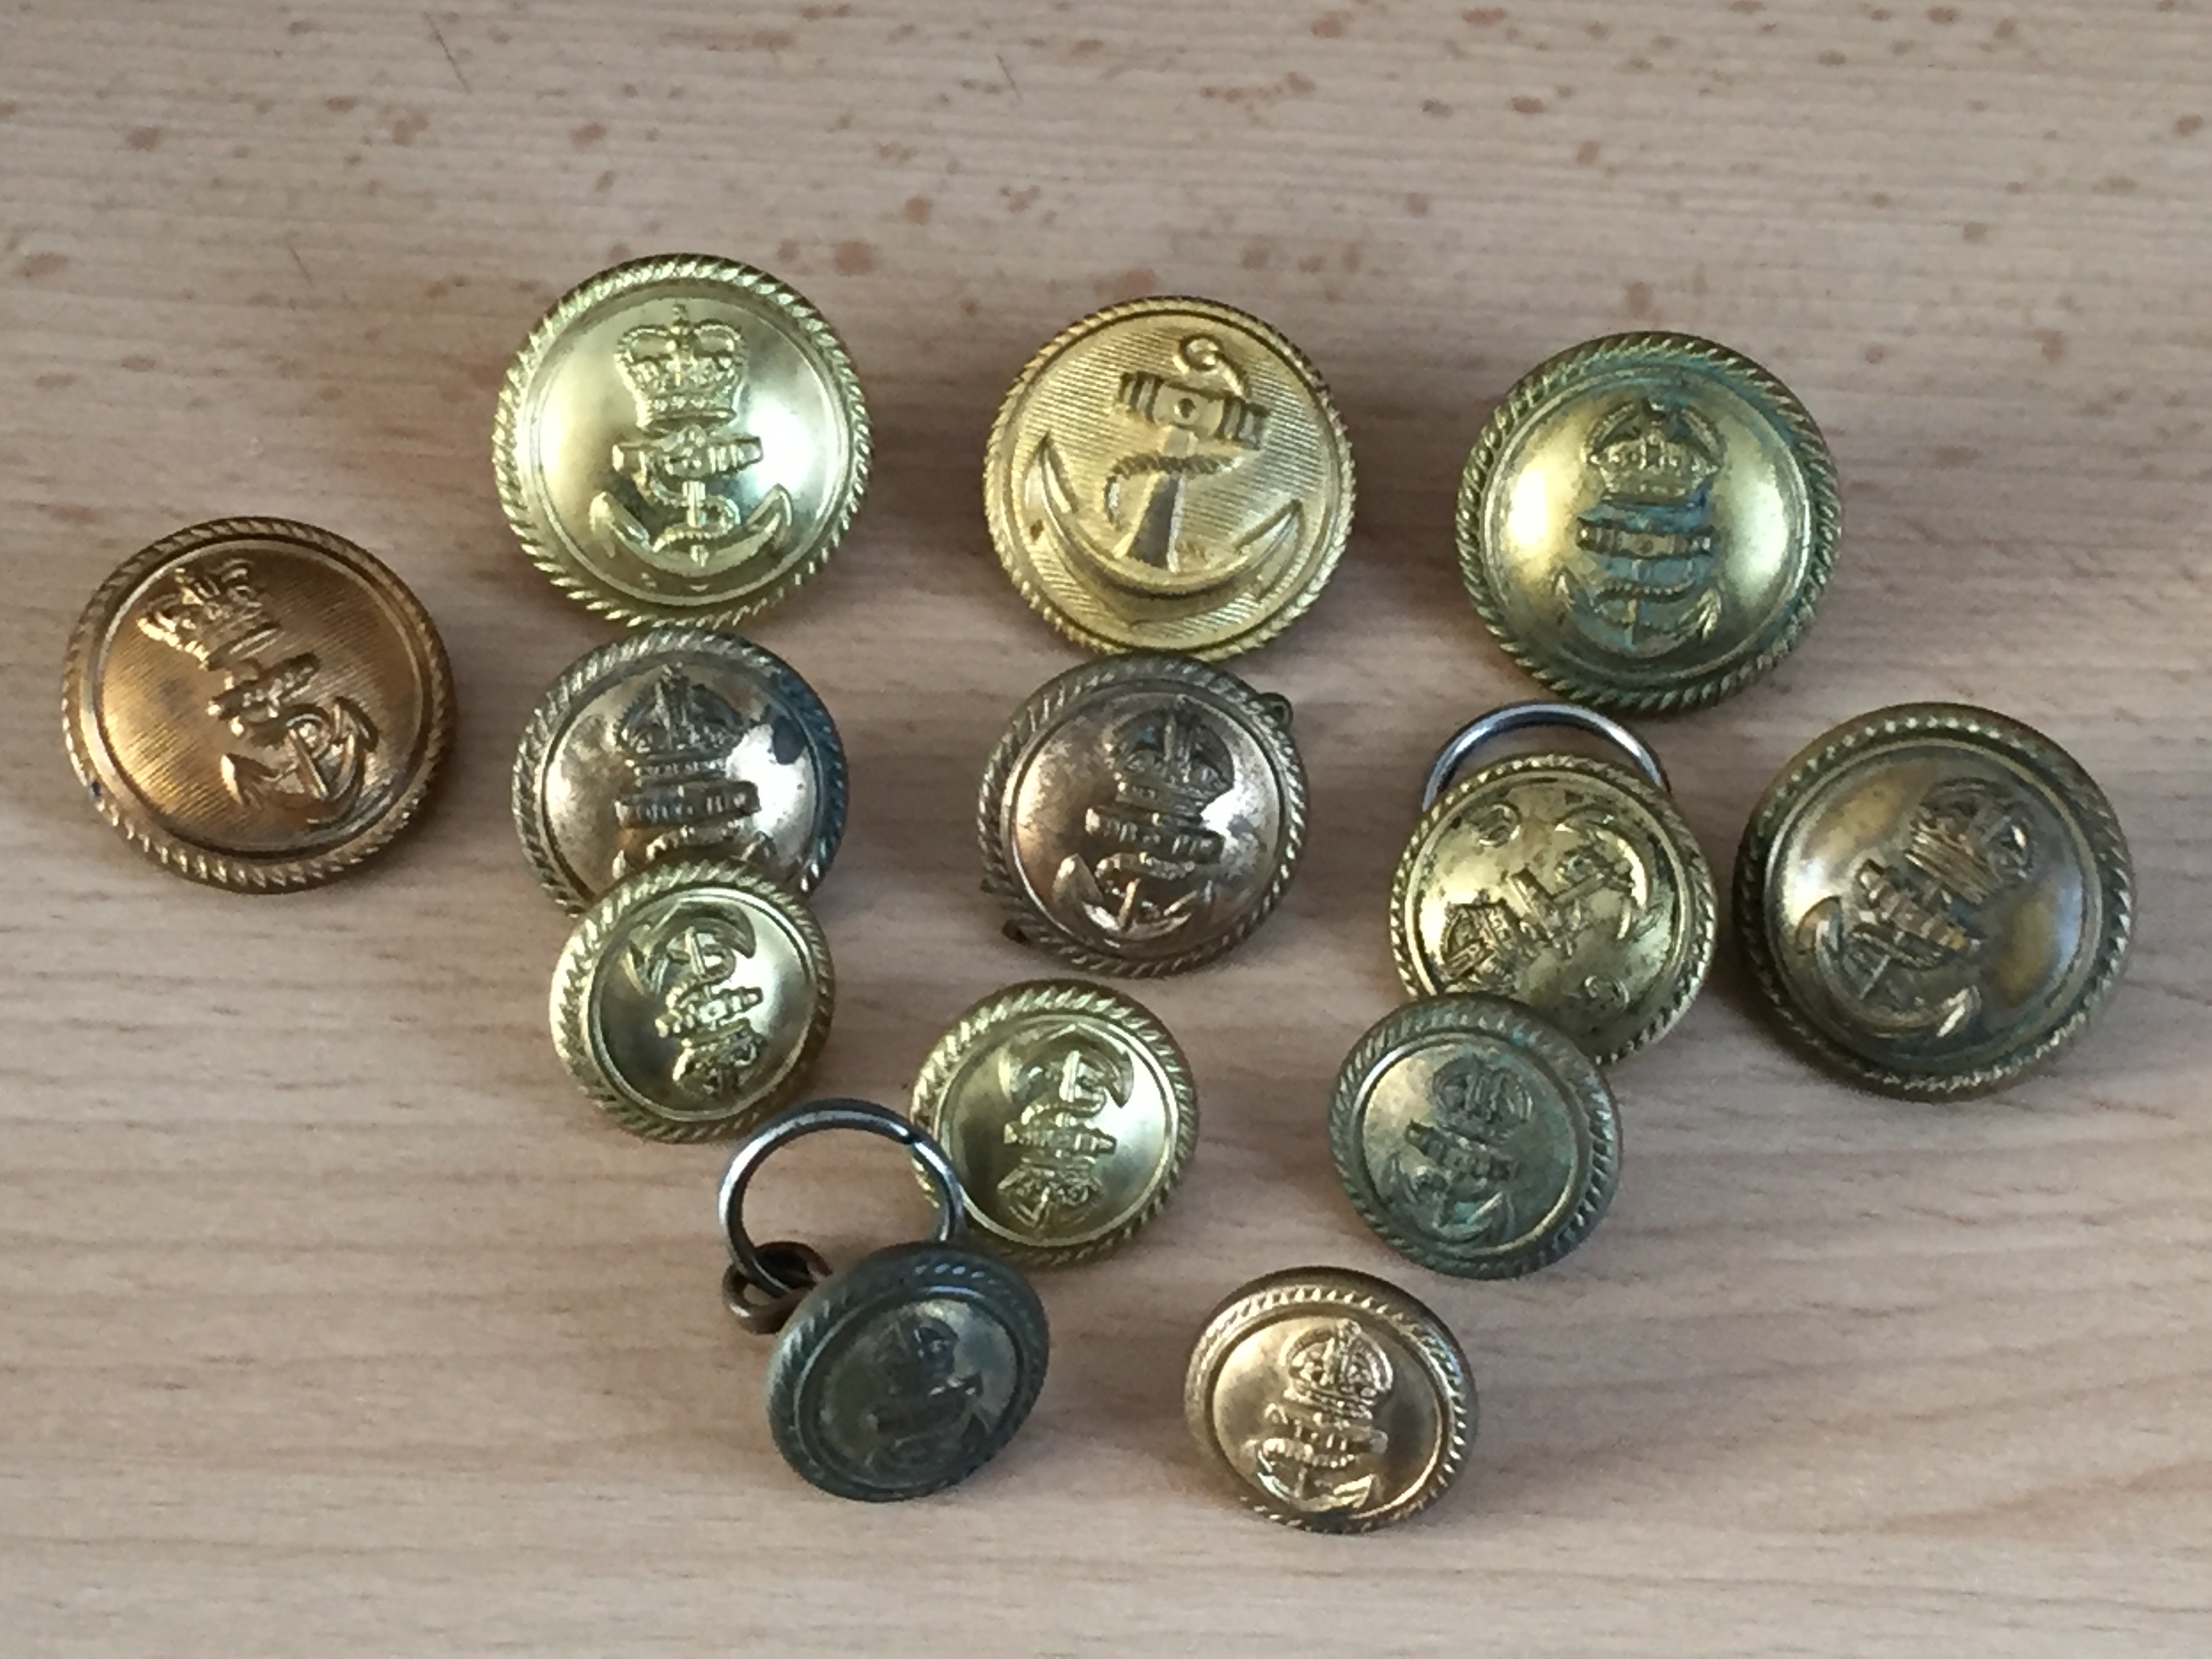 SELECTION OF DIFFERENT SIZED ROYAL NAVAL BUTTONS